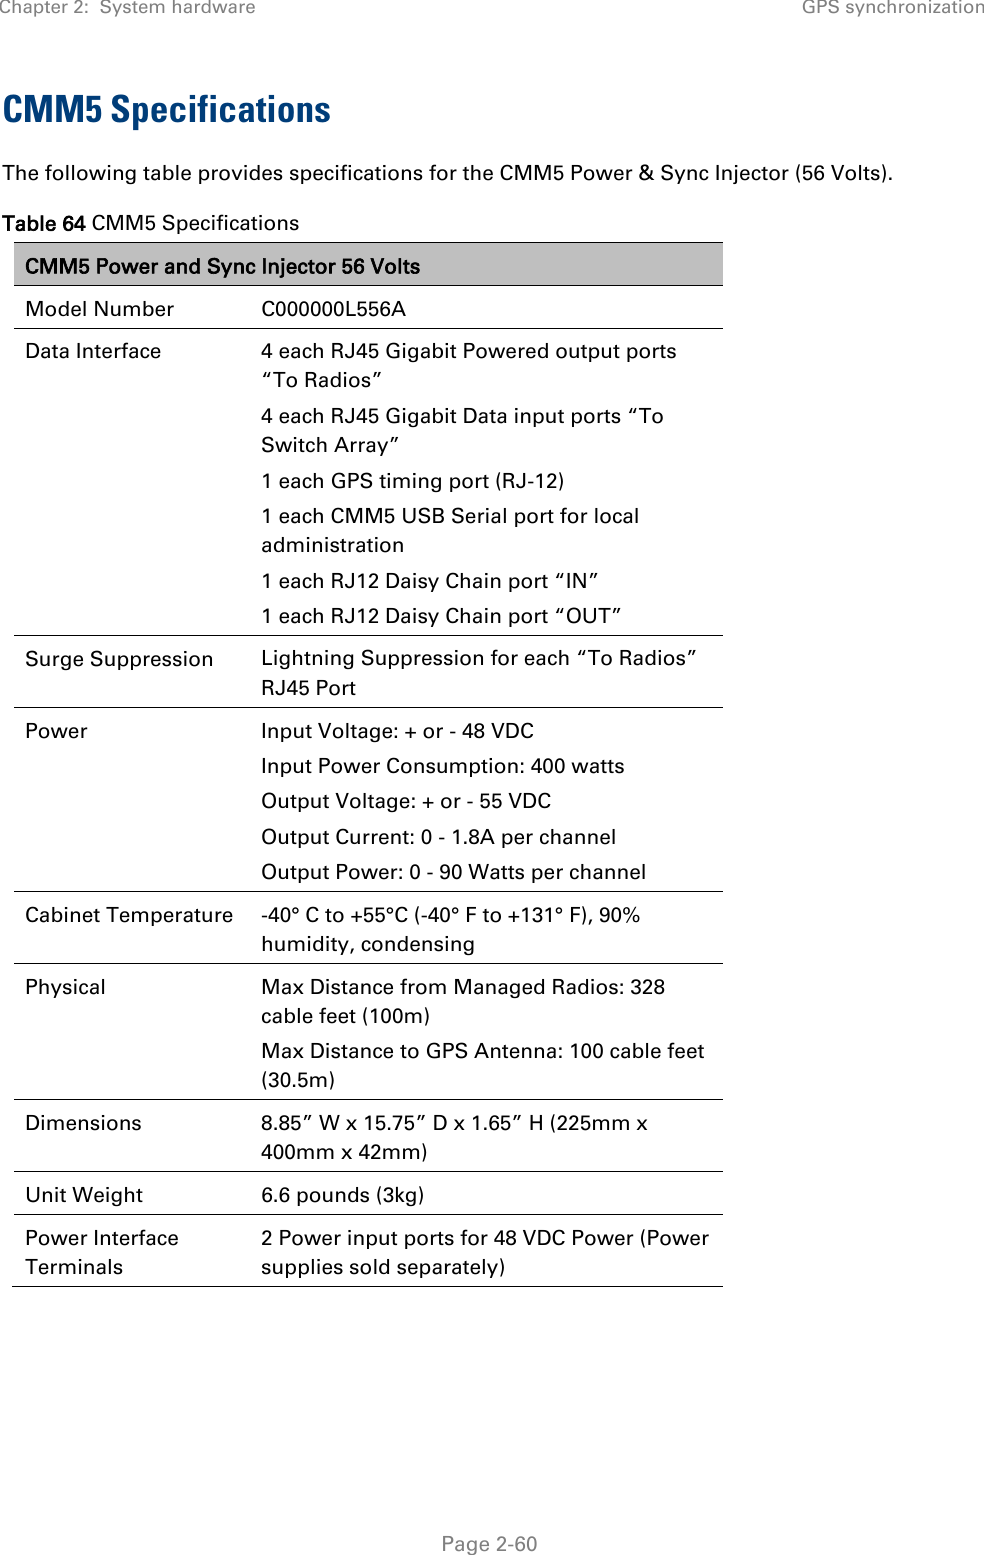 Chapter 2:  System hardware GPS synchronization   Page 2-60 CMM5 Specifications The following table provides specifications for the CMM5 Power &amp; Sync Injector (56 Volts). Table 64 CMM5 Specifications CMM5 Power and Sync Injector 56 Volts Model Number C000000L556A Data Interface 4 each RJ45 Gigabit Powered output ports “To Radios” 4 each RJ45 Gigabit Data input ports “To Switch Array” 1 each GPS timing port (RJ-12) 1 each CMM5 USB Serial port for local administration 1 each RJ12 Daisy Chain port “IN” 1 each RJ12 Daisy Chain port “OUT” Surge Suppression  Lightning Suppression for each “To Radios” RJ45 Port Power  Input Voltage: + or - 48 VDC Input Power Consumption: 400 watts Output Voltage: + or - 55 VDC Output Current: 0 - 1.8A per channel Output Power: 0 - 90 Watts per channel Cabinet Temperature -40° C to +55°C (-40° F to +131° F), 90% humidity, condensing Physical  Max Distance from Managed Radios: 328 cable feet (100m) Max Distance to GPS Antenna: 100 cable feet (30.5m) Dimensions 8.85” W x 15.75” D x 1.65” H (225mm x 400mm x 42mm) Unit Weight 6.6 pounds (3kg) Power Interface Terminals 2 Power input ports for 48 VDC Power (Power supplies sold separately)  